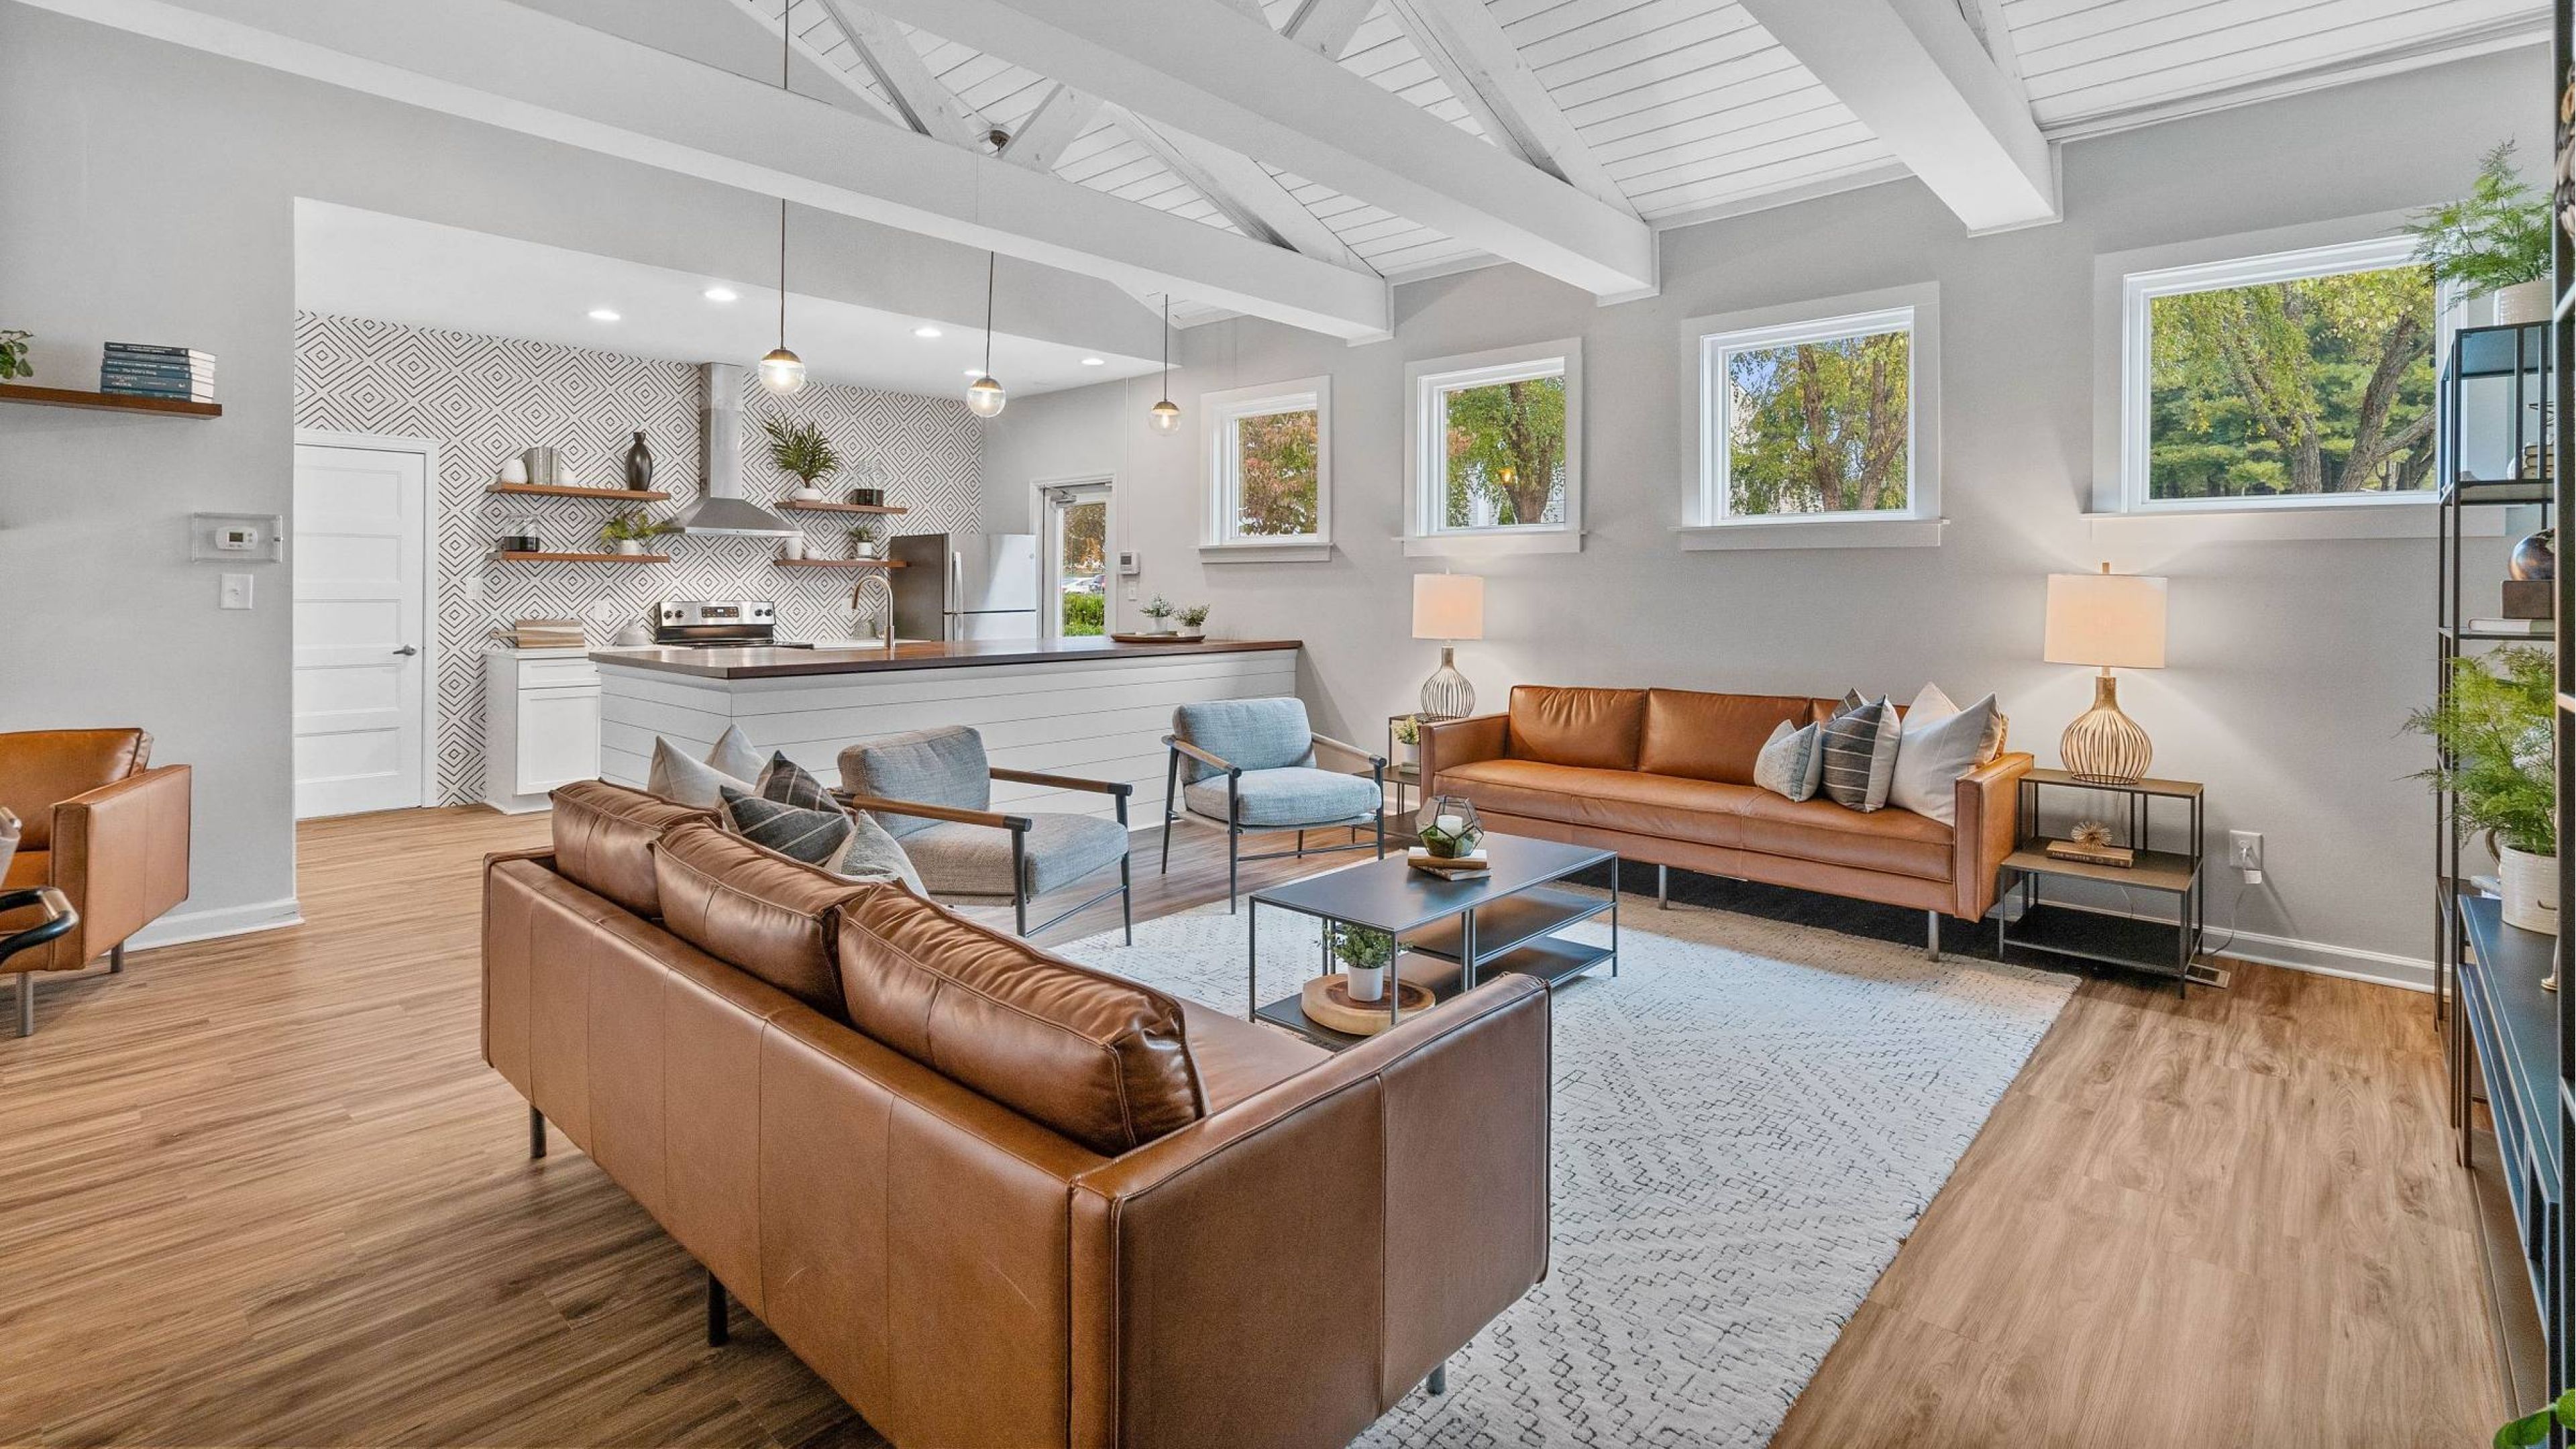 Hawthorne at Southside offers an inviting clubhouse lounge showcasing a kitchen area and plush couches